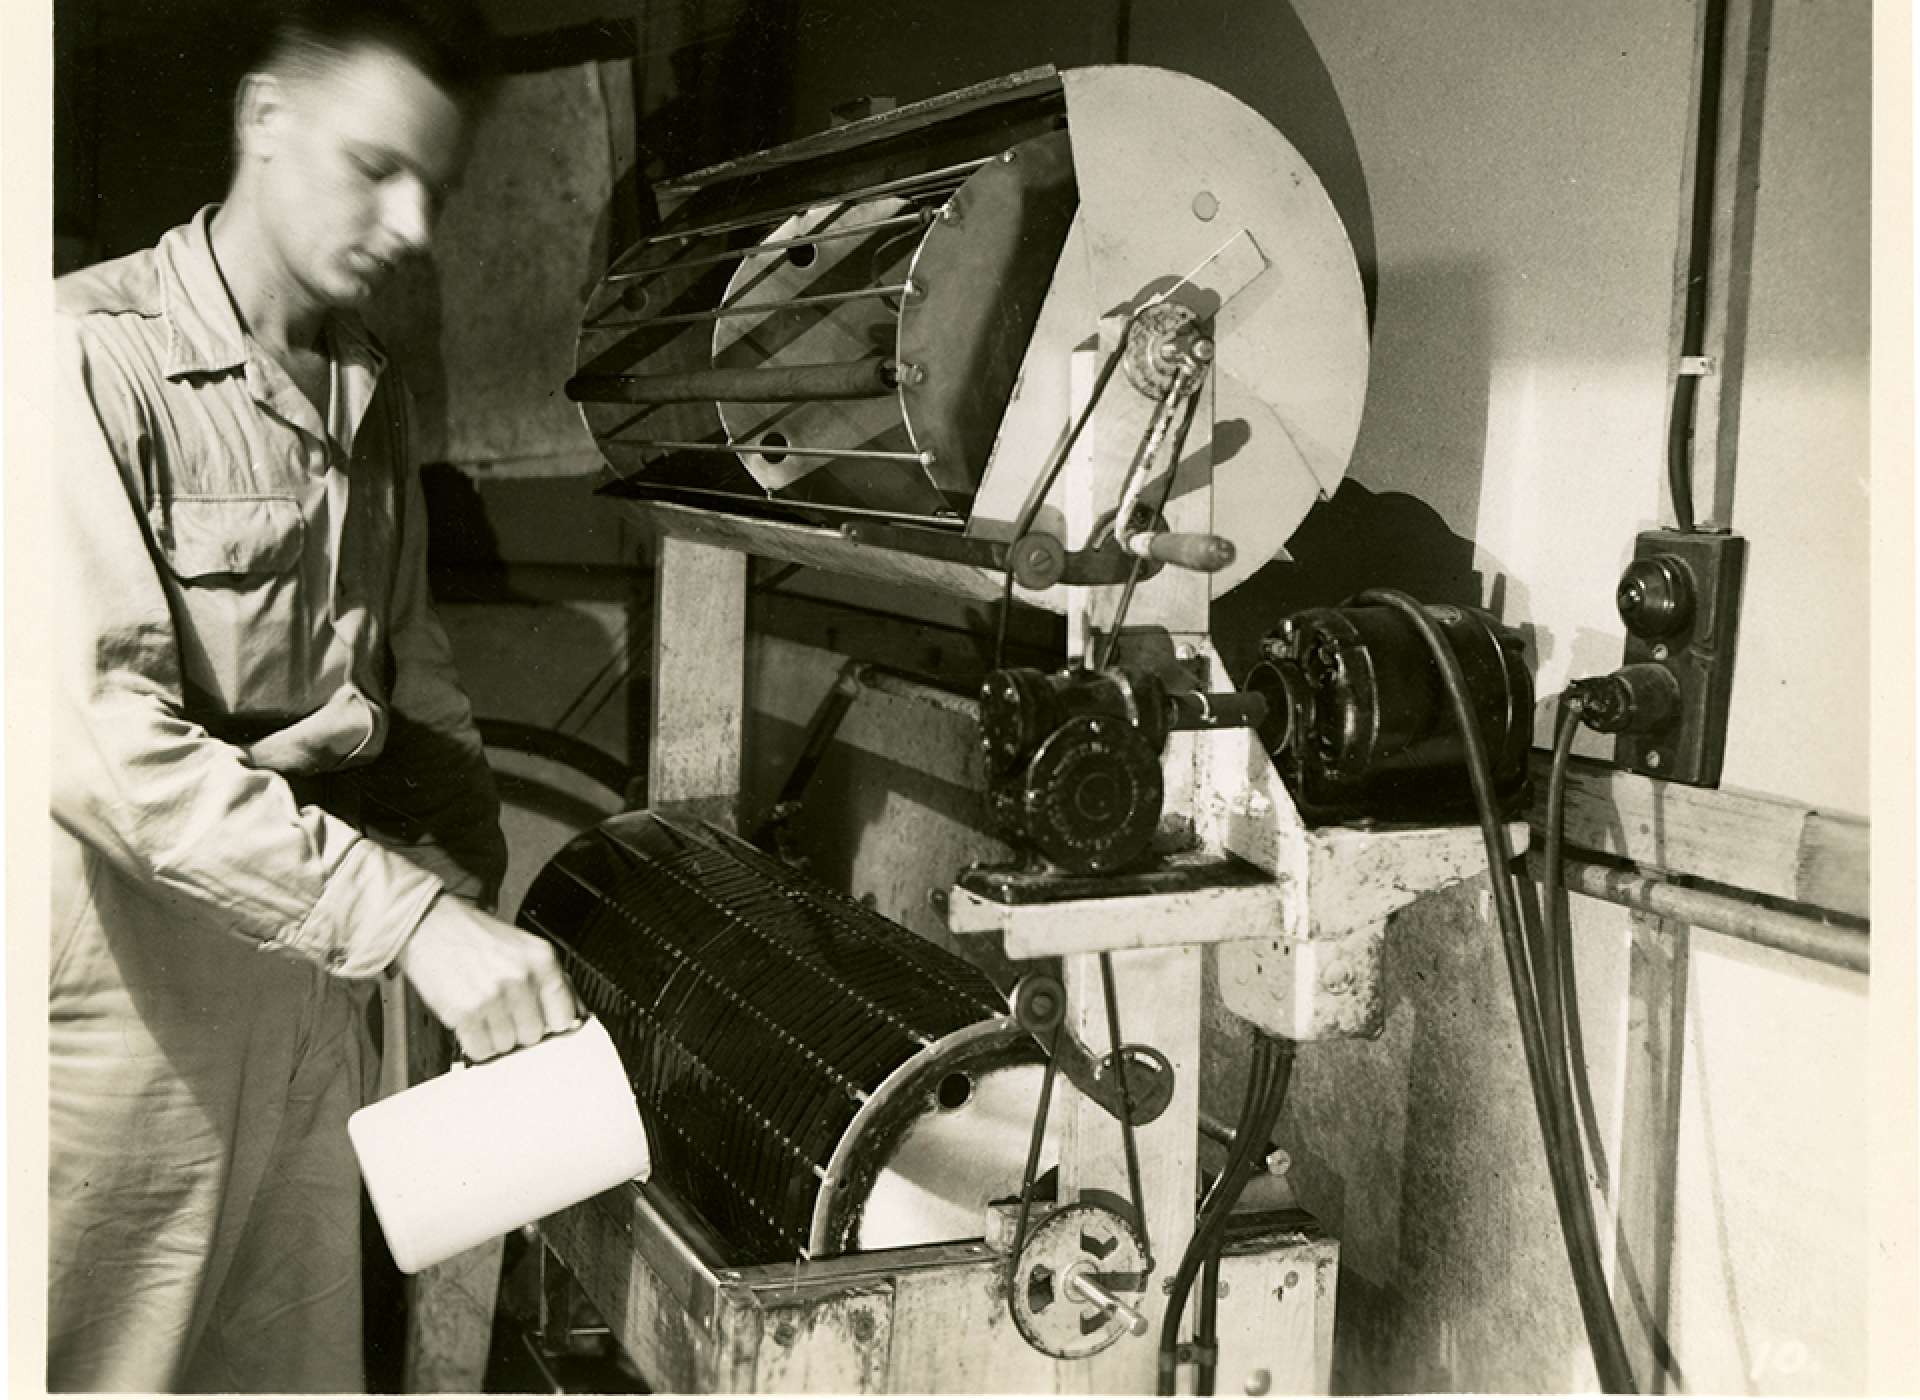 V-mail operation in the field at APO 929.”The next step is the processing of the film, which is done both on automatic machines which do individual rolls. In this shot the operator has completed the developing and is pouring in the hypo or fixing bath, after which the film will be subjected to a water spray to wash it thoroughly. It is then fed on to the upper reel which it is thoroughly dried by means of a warm air stream.”